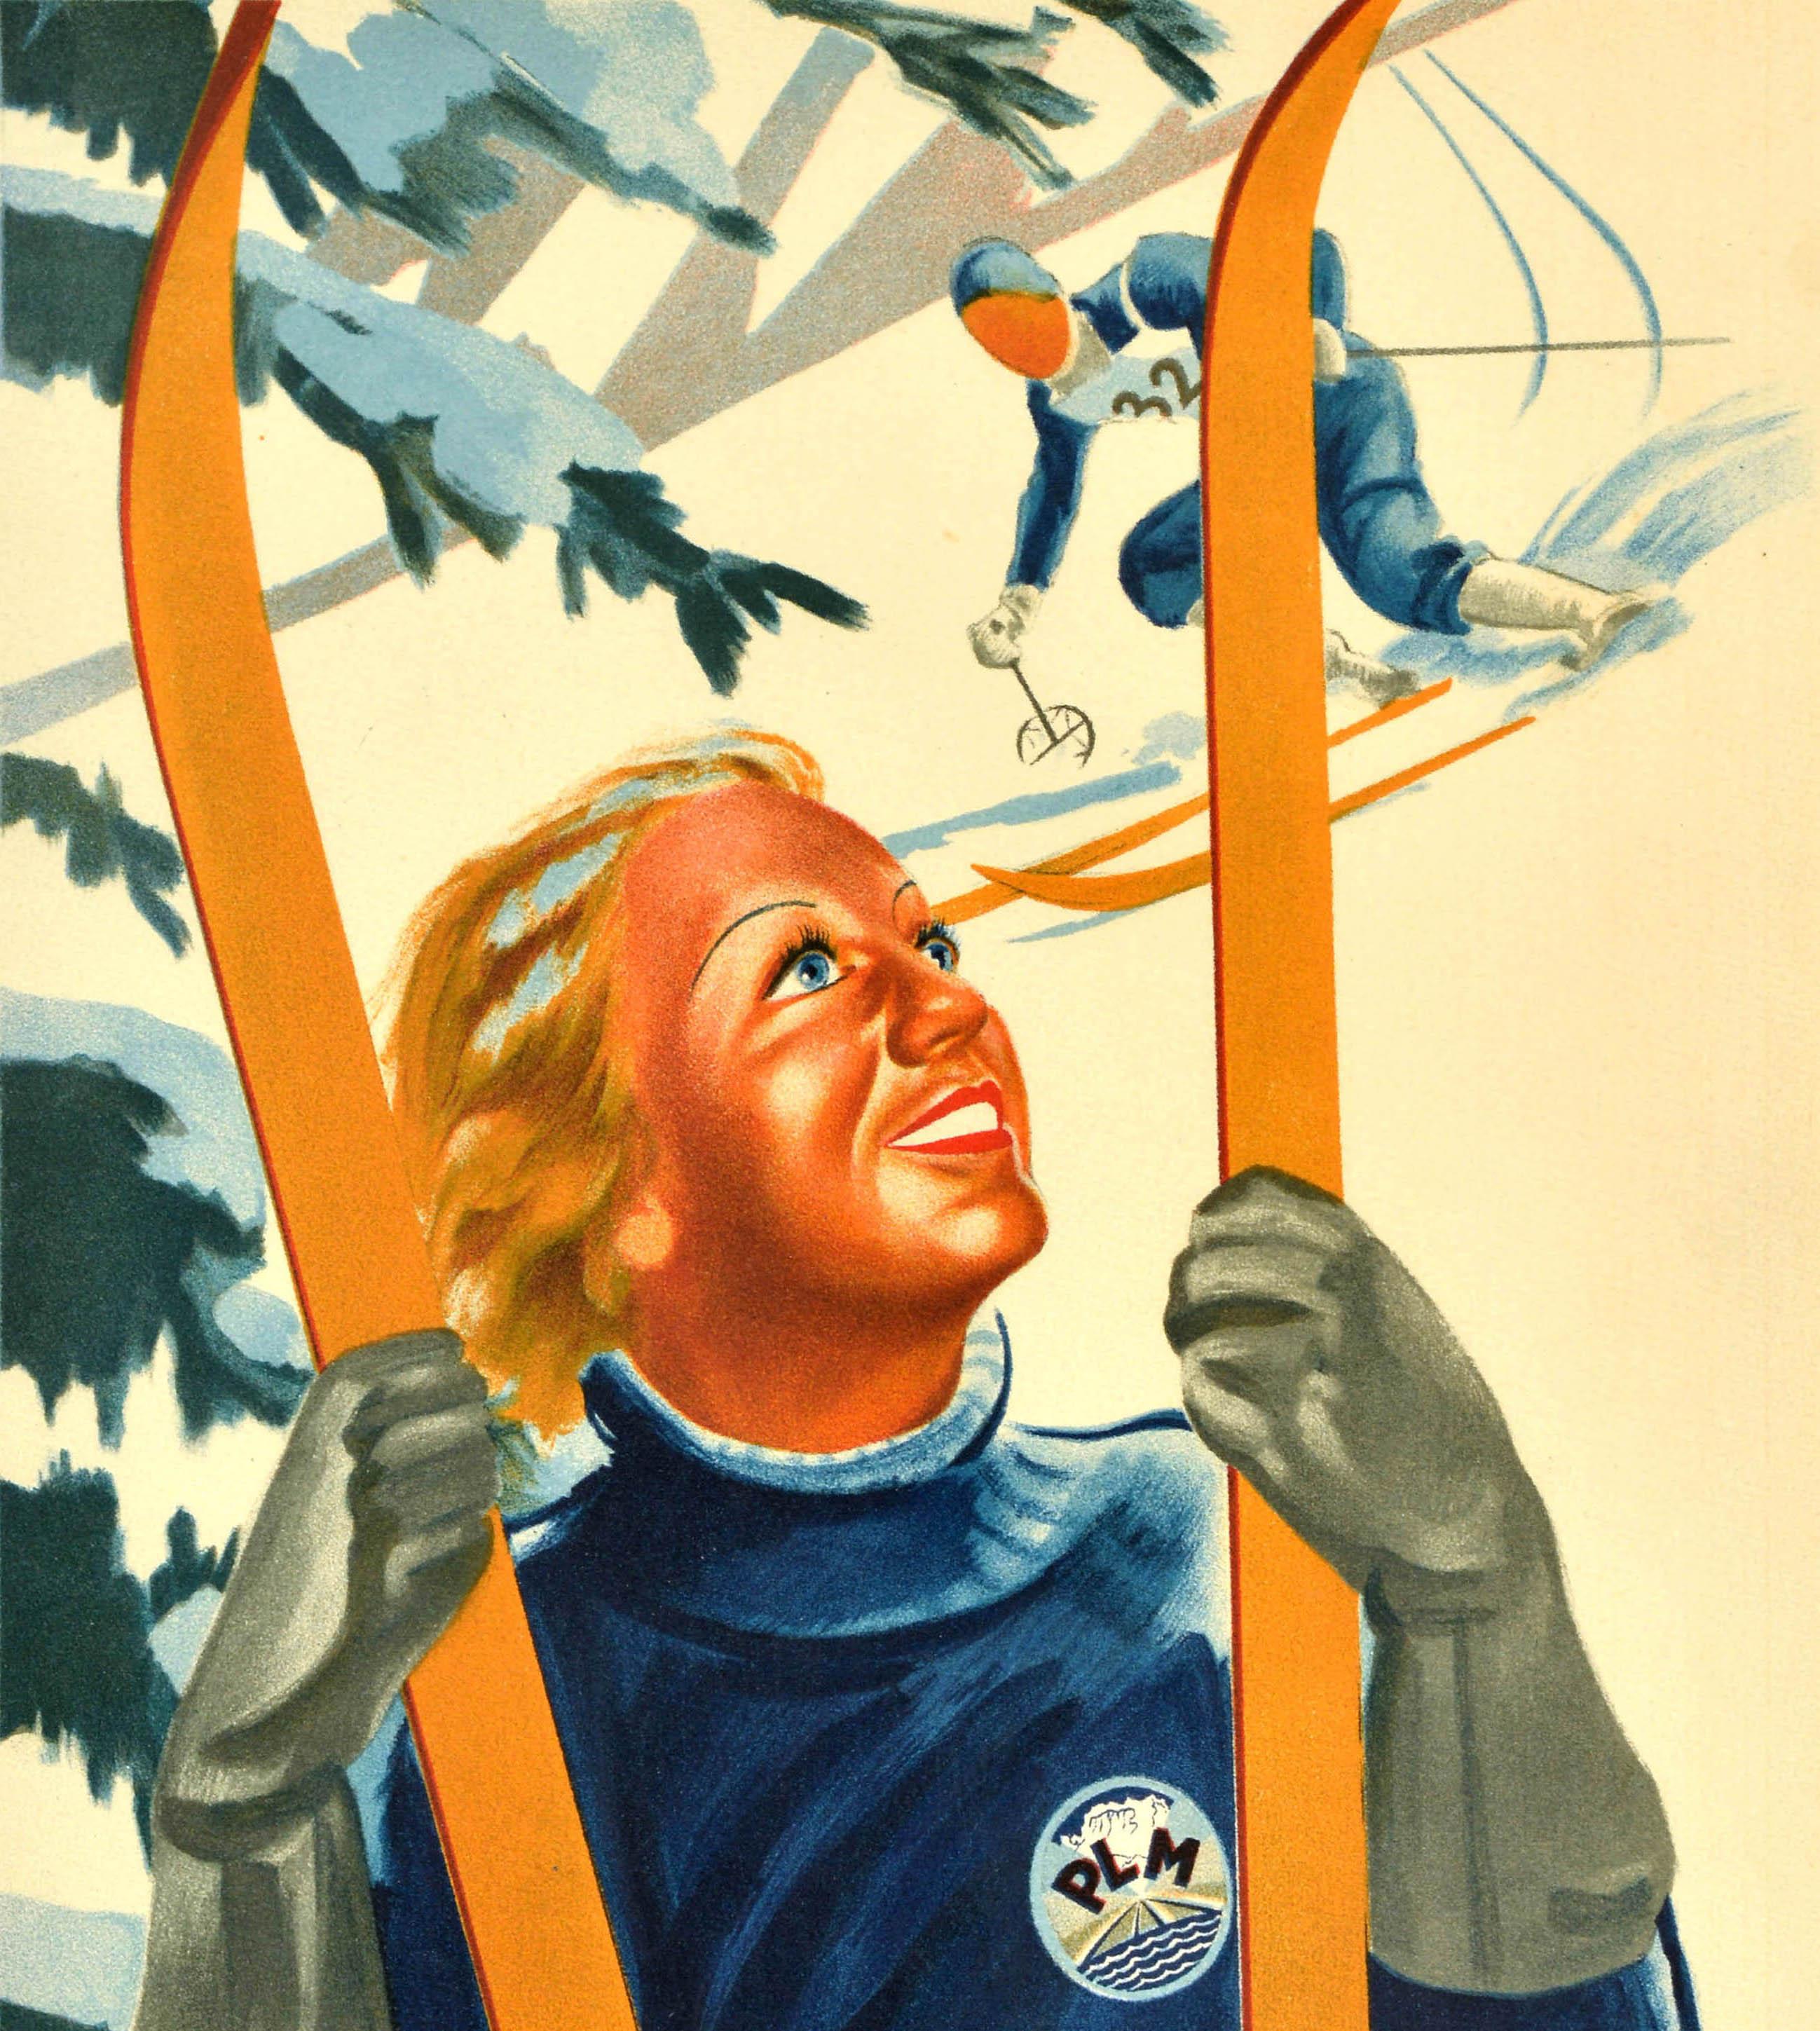 French Original Vintage Winter Sport Skiing Travel Poster Alpes And Jura PLM Railway For Sale